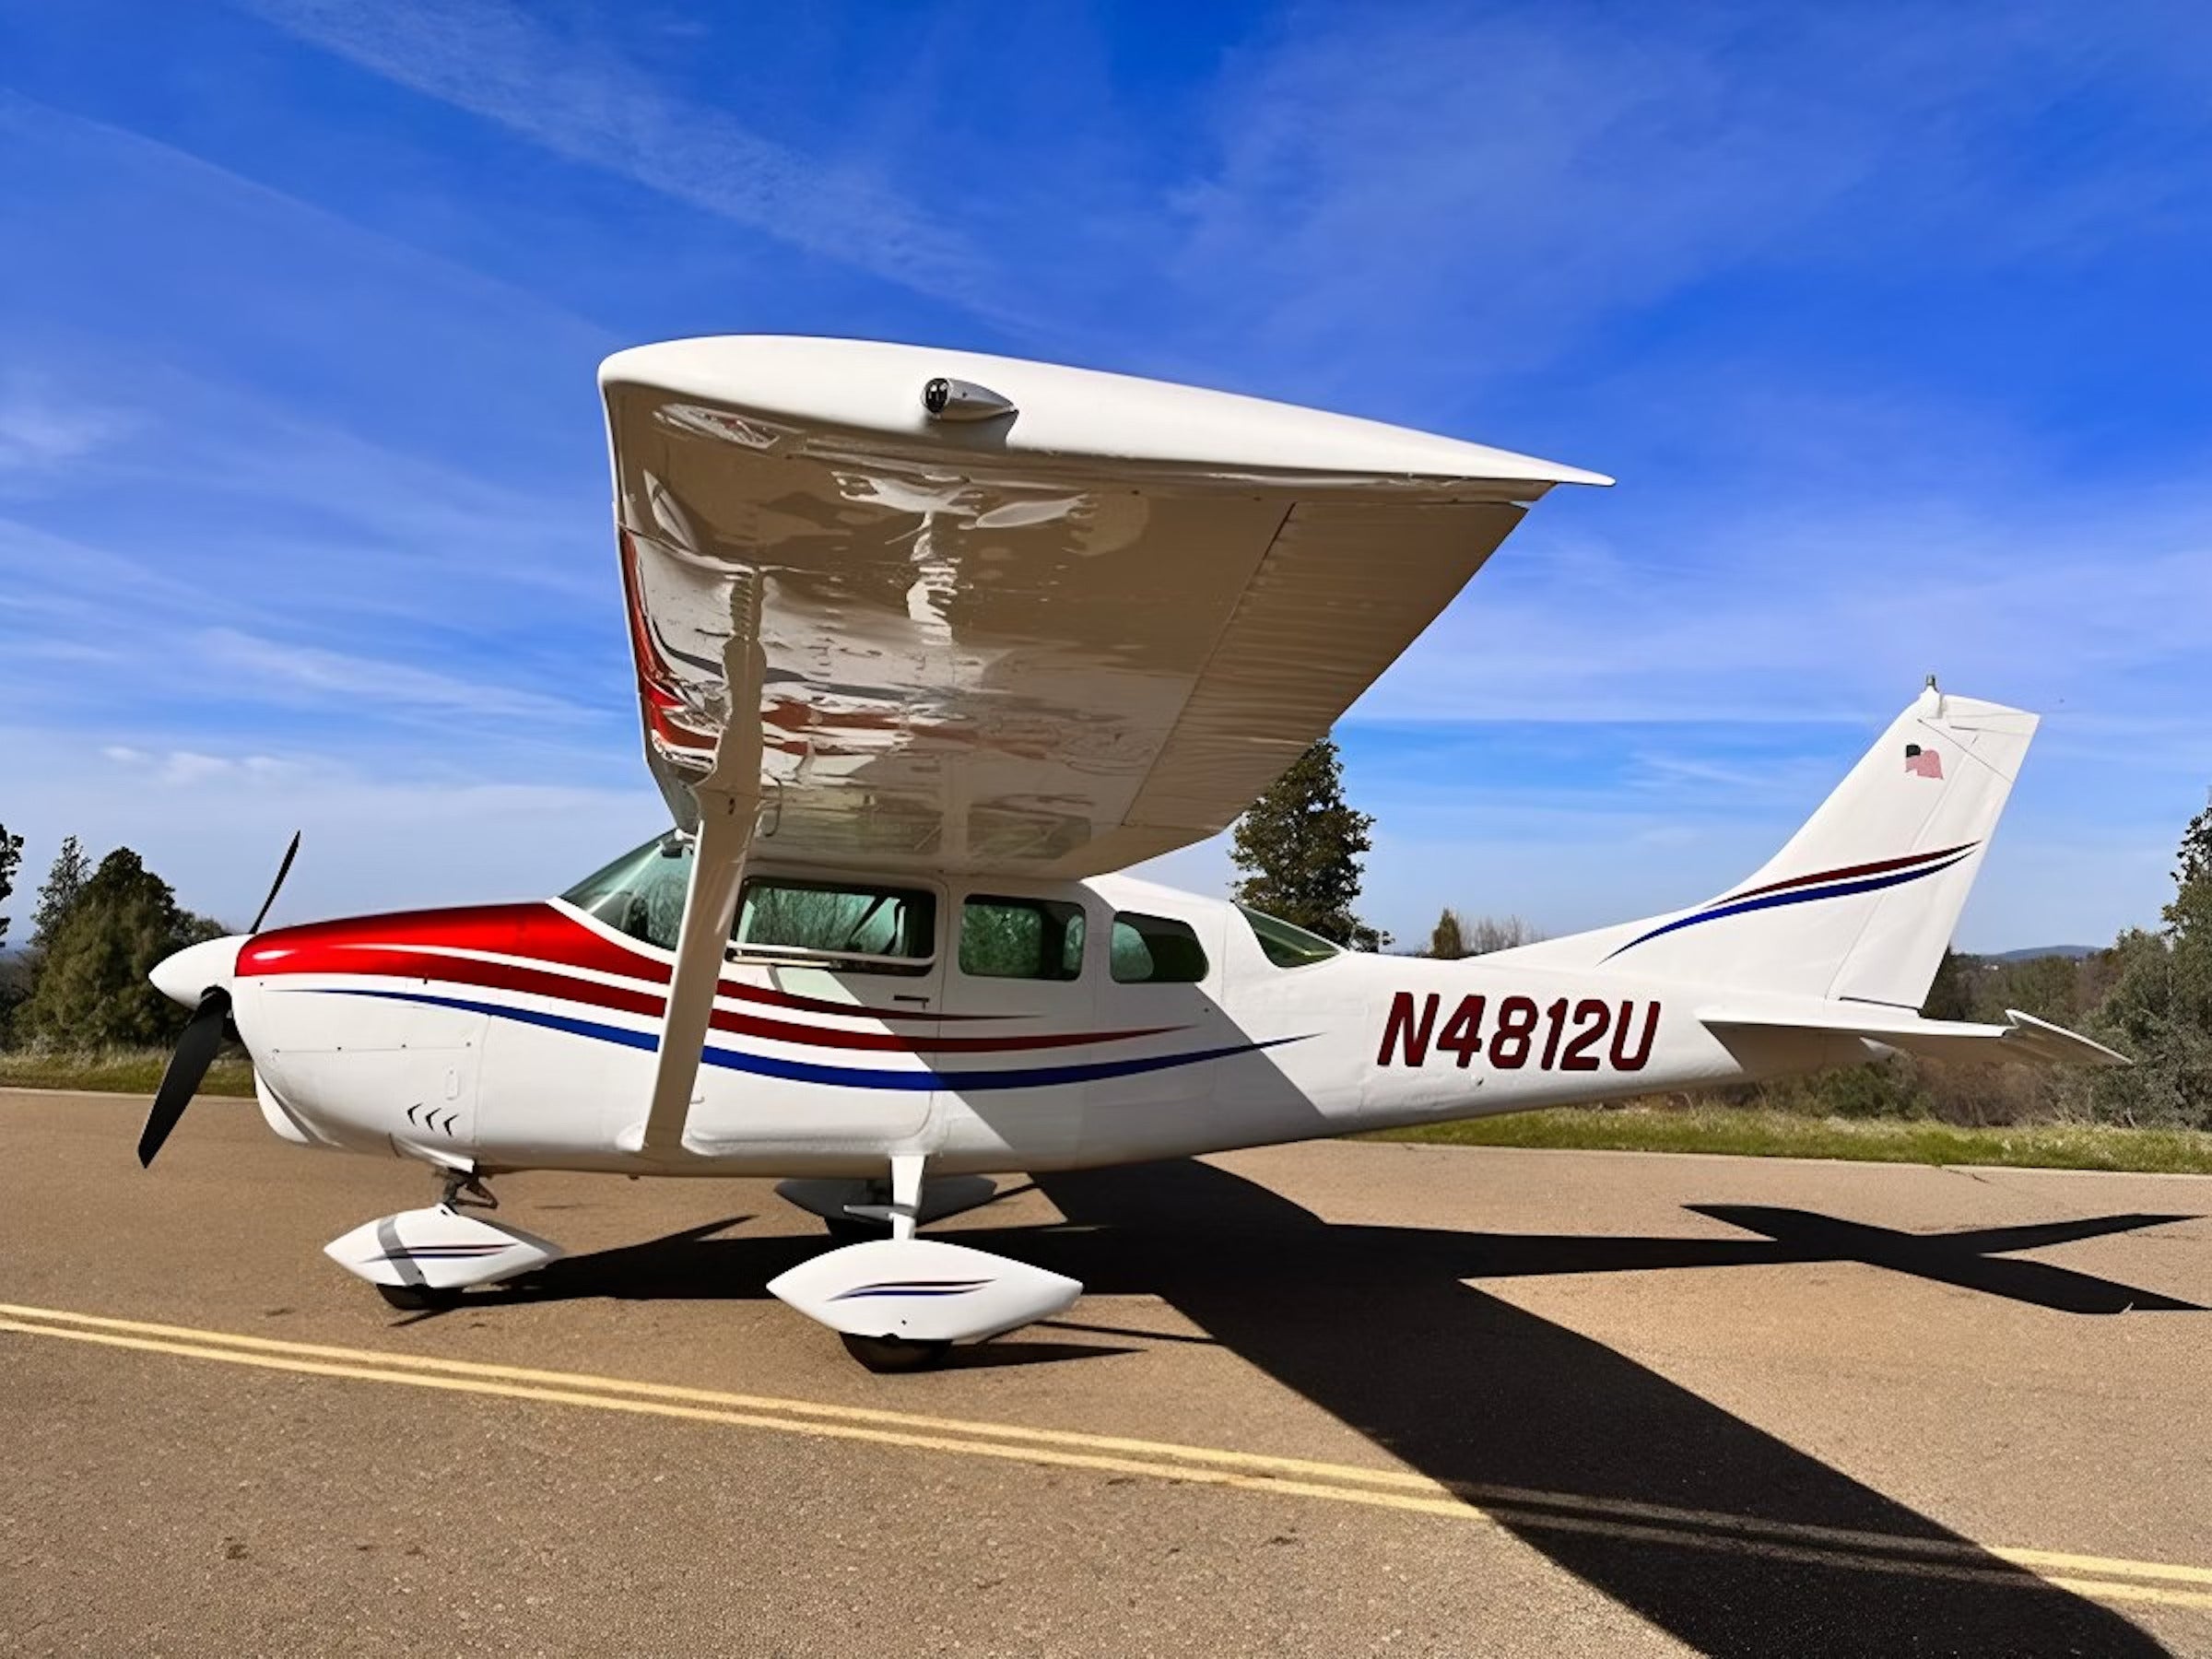 This 1964 Cessna 205 Super Skywagon Is a Heavy-Lifting, 6-Seat ‘AircraftForSale’ Top Pick